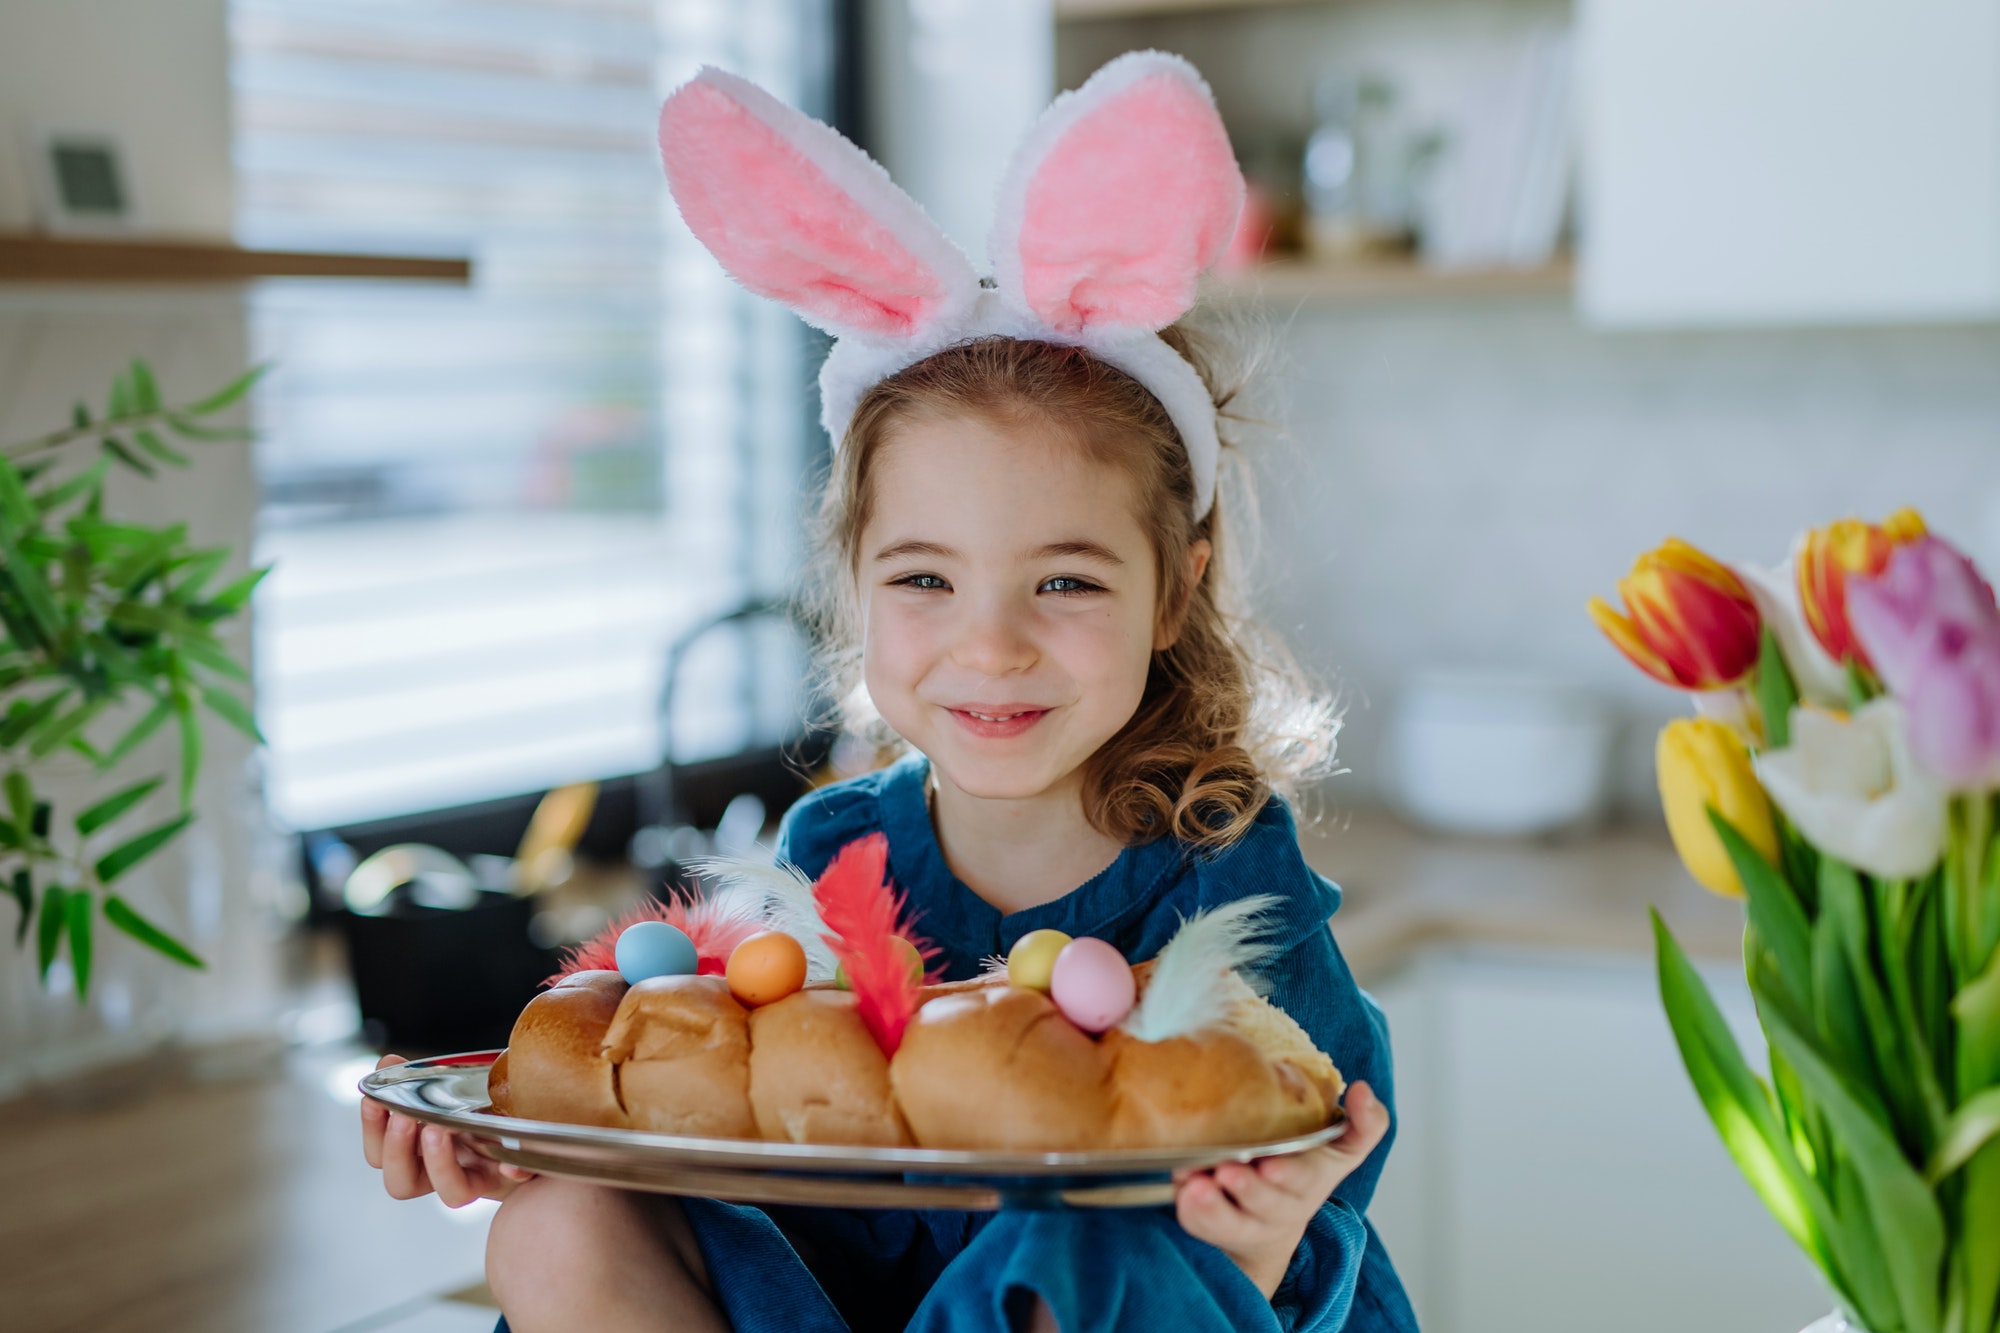 Little girl holding easter pastries, celebrating easter and spring.